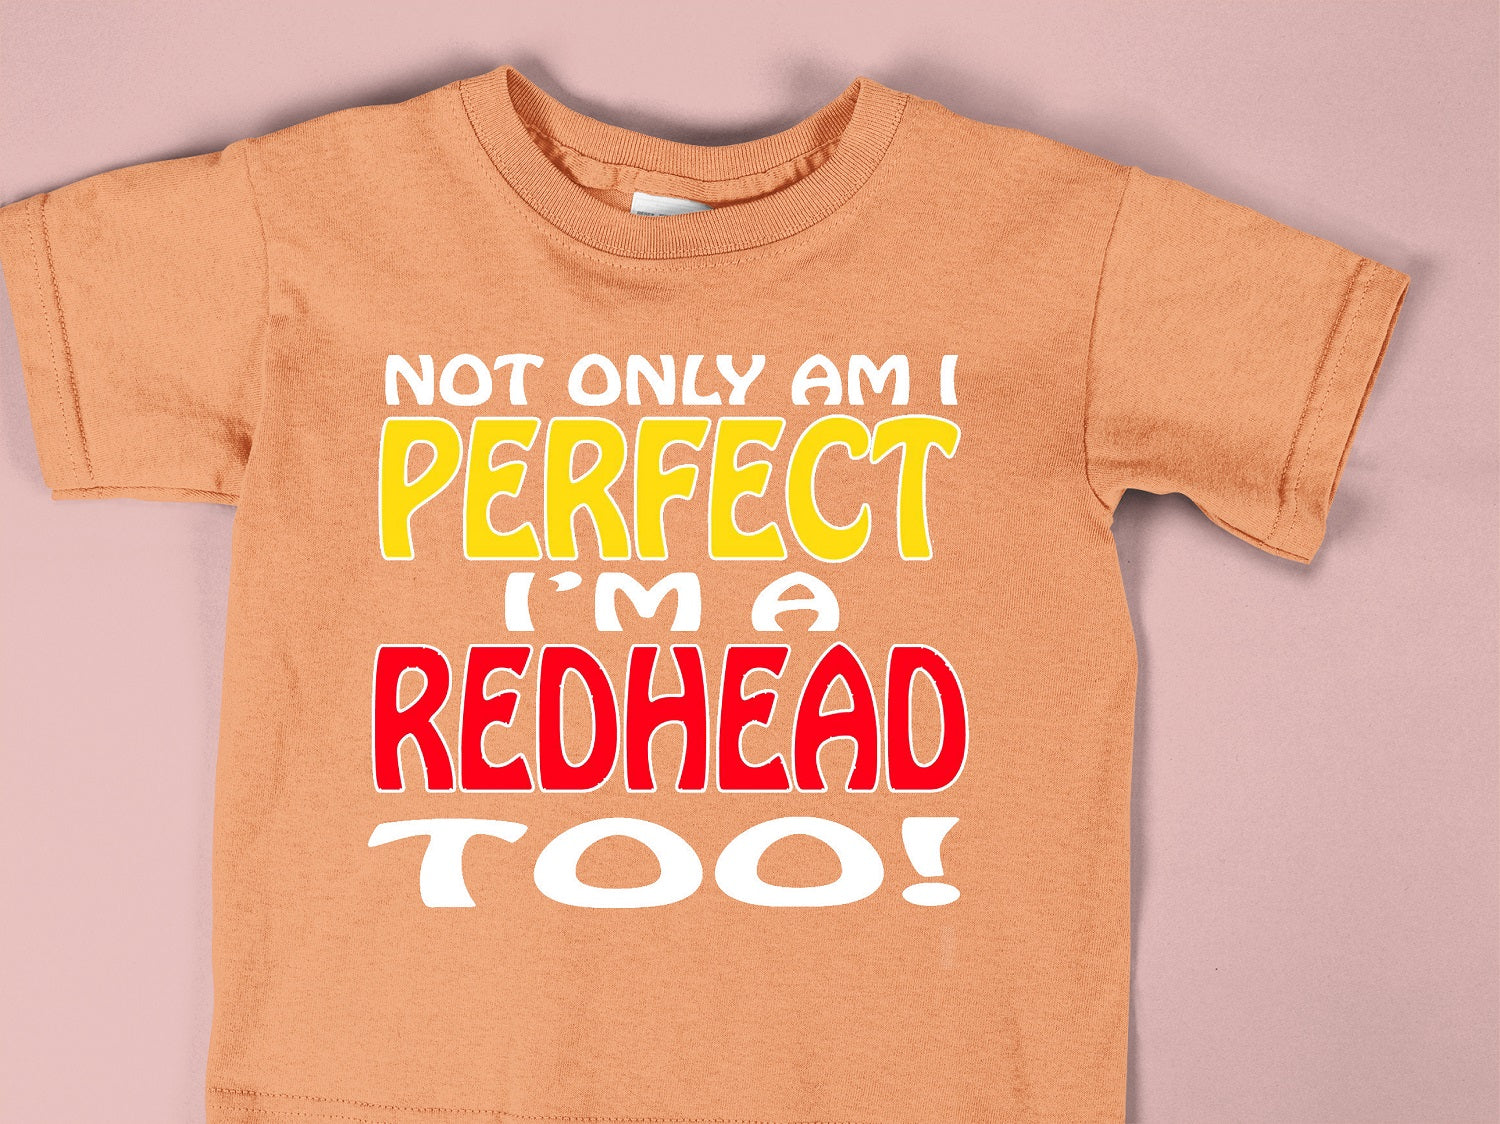 Not Only Am I Perfect I Am A Redhead Too! - KID-039